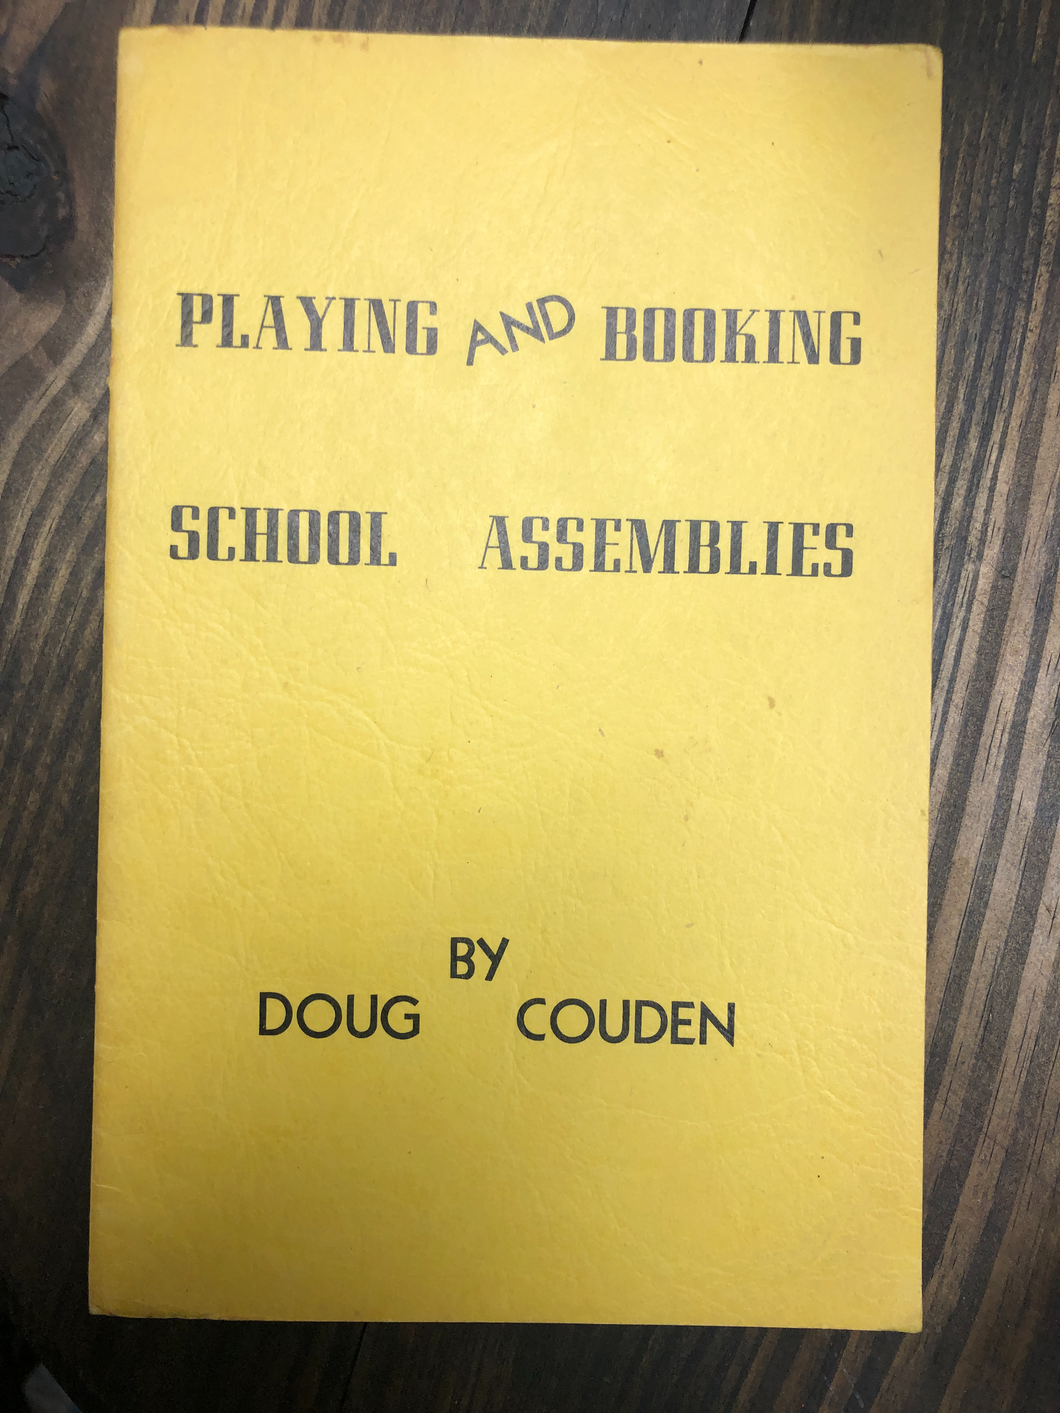 Playing and booking school assemblies by Doug Couden